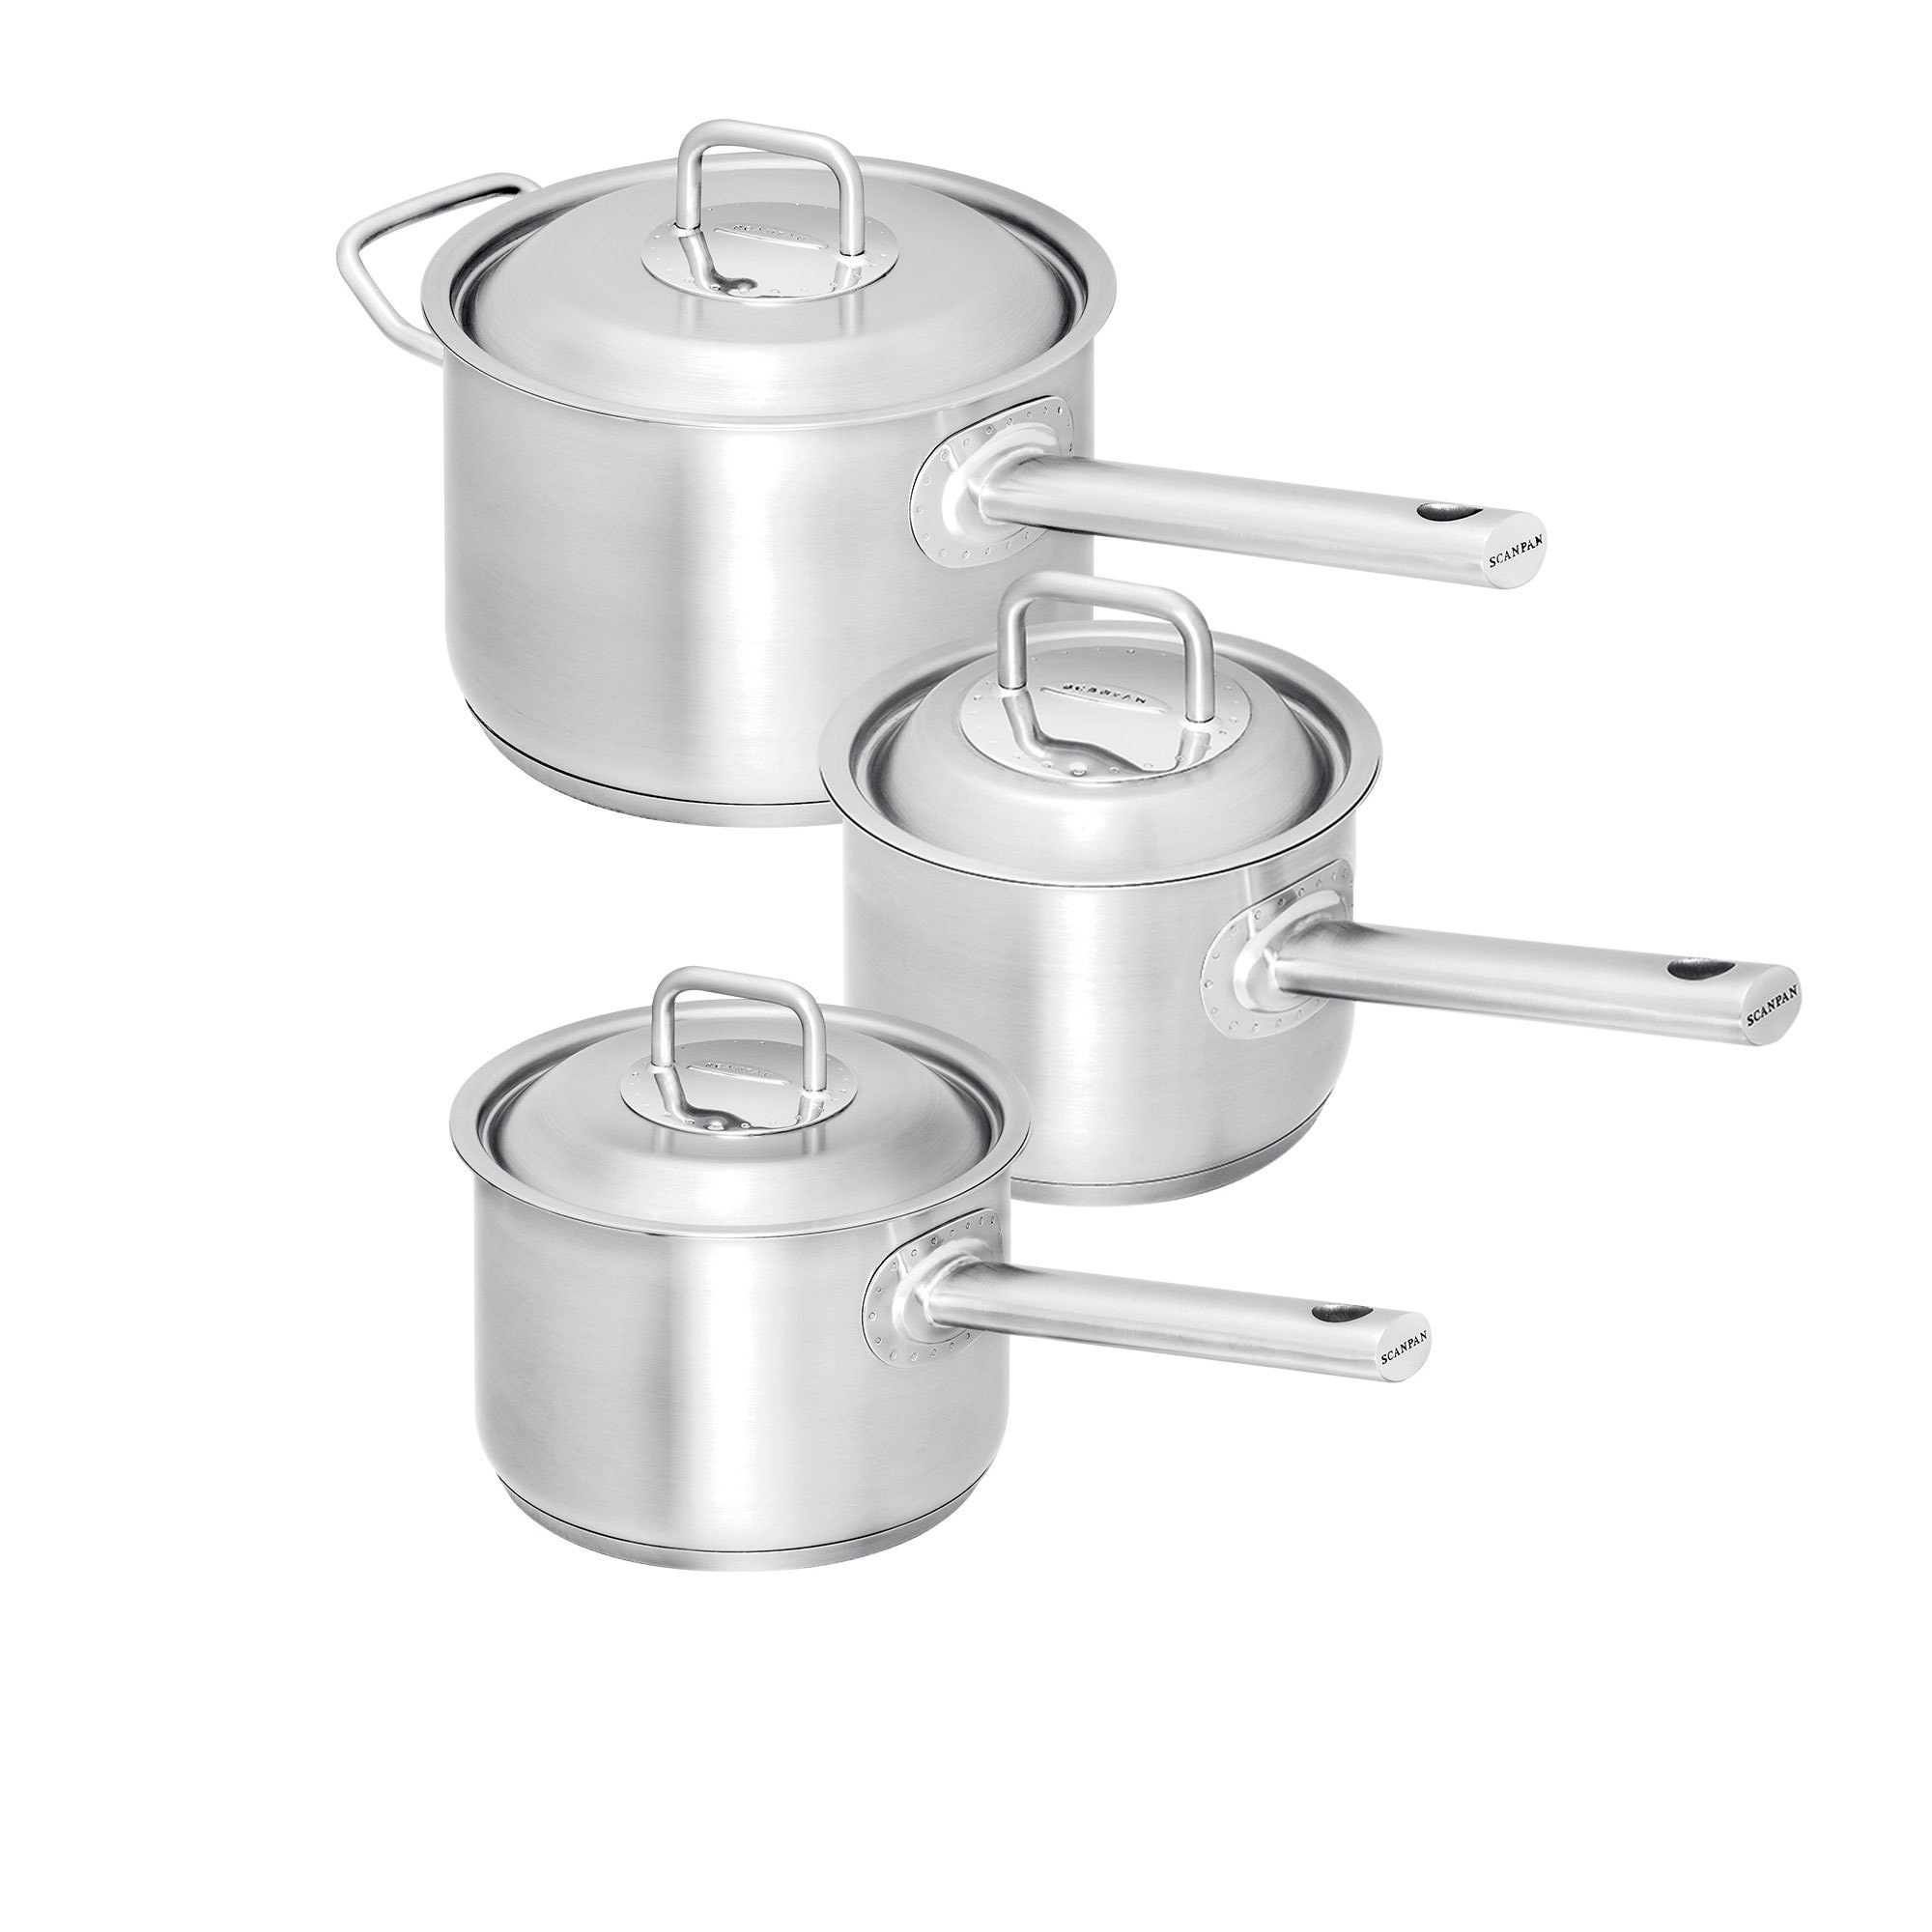 Scanpan Commercial 3pc Stainless Steel Saucepan Set Image 1